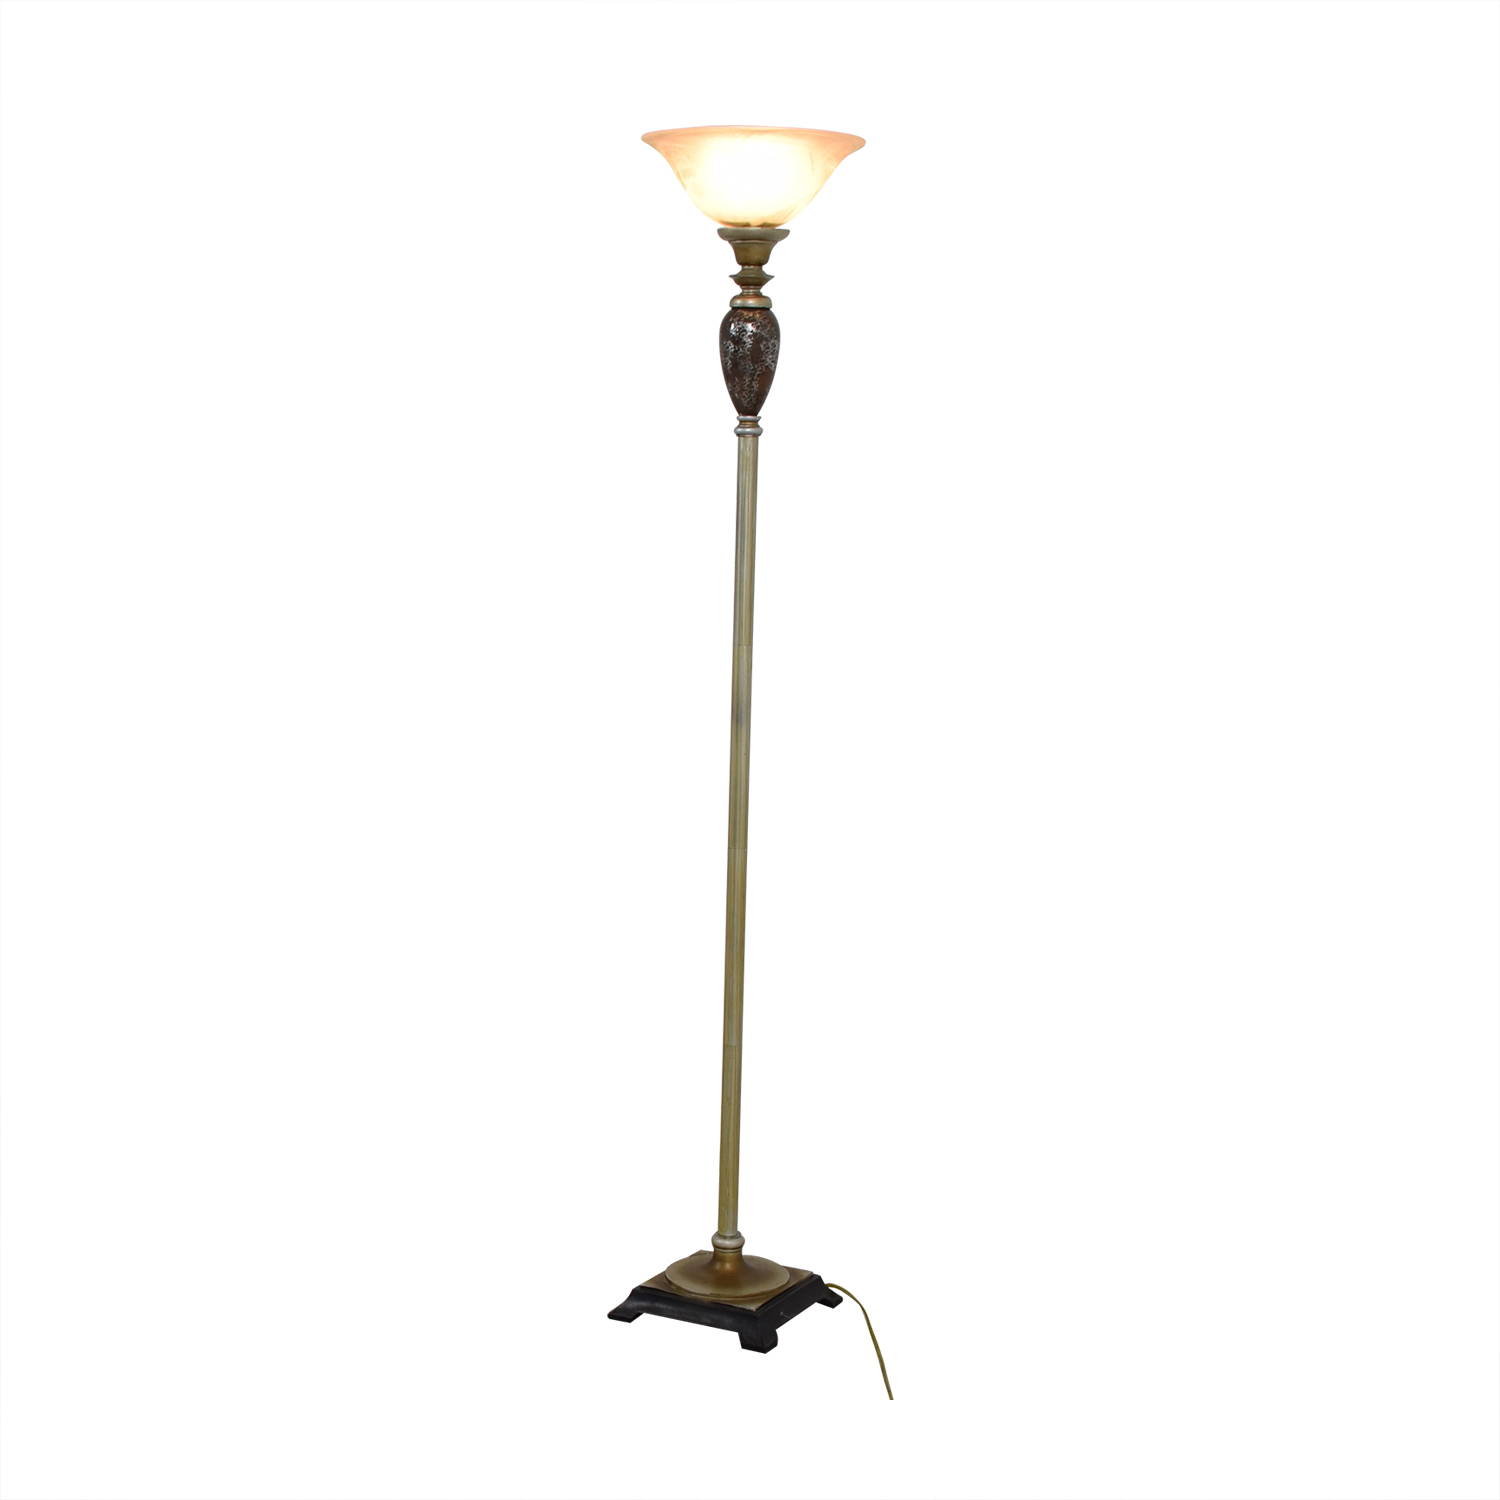 55 Off Bed Bath Beyond Bed Bath And Beyond Torchiere Floor Lamp Decor pertaining to dimensions 1500 X 1500